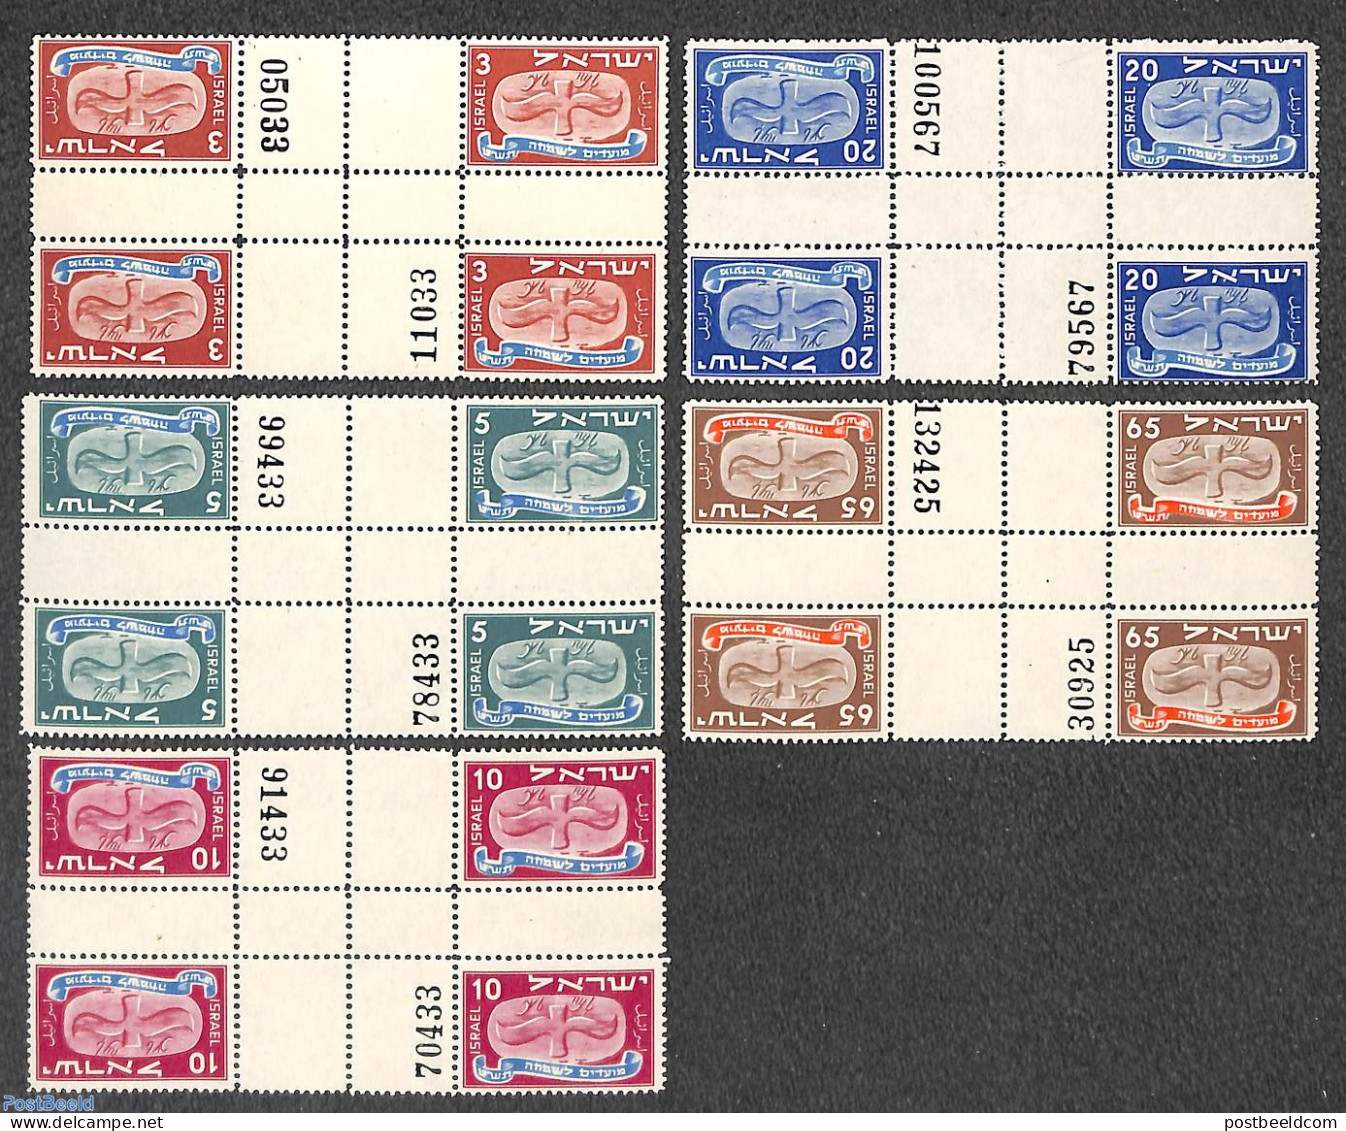 Israel 1948 Israël, 5 Cross Gutters Tete-beche Blocks MNH, Rare Item!, Mint NH - Unused Stamps (with Tabs)